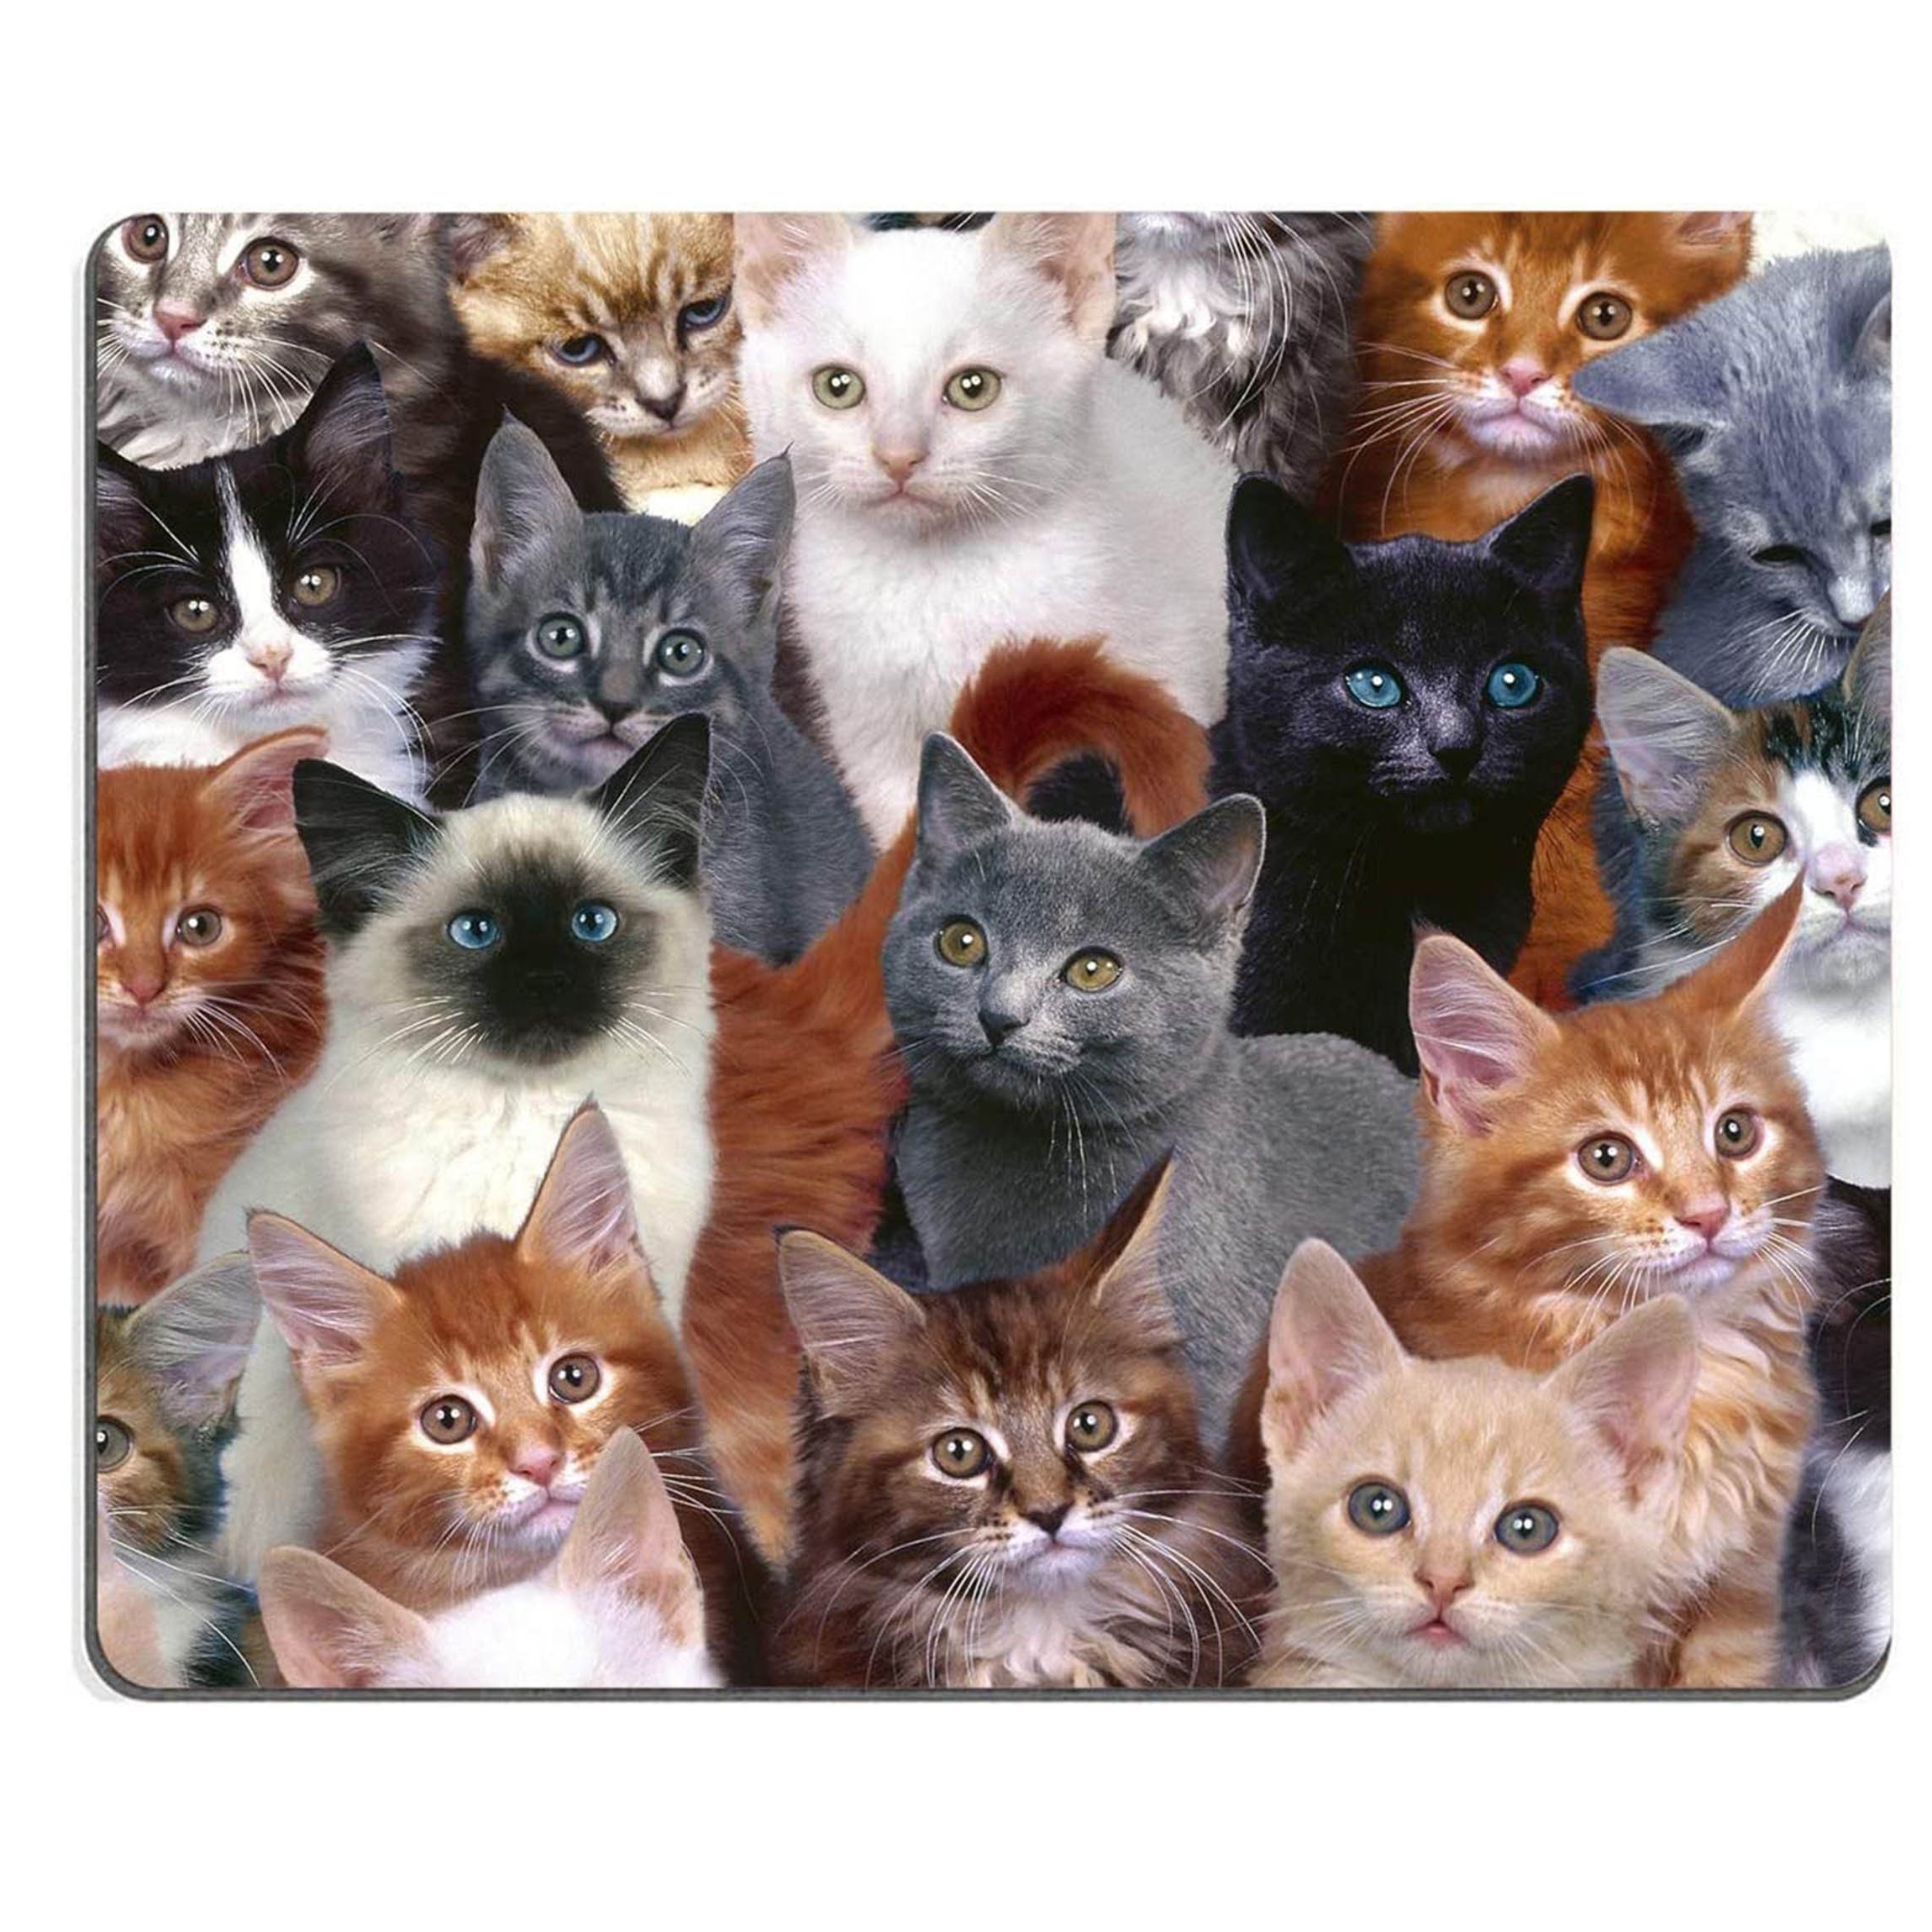 

Cute Cats Mouse Pad Non-slip Rubber Base Gaming Mouse Pads For Computers Laptop Office